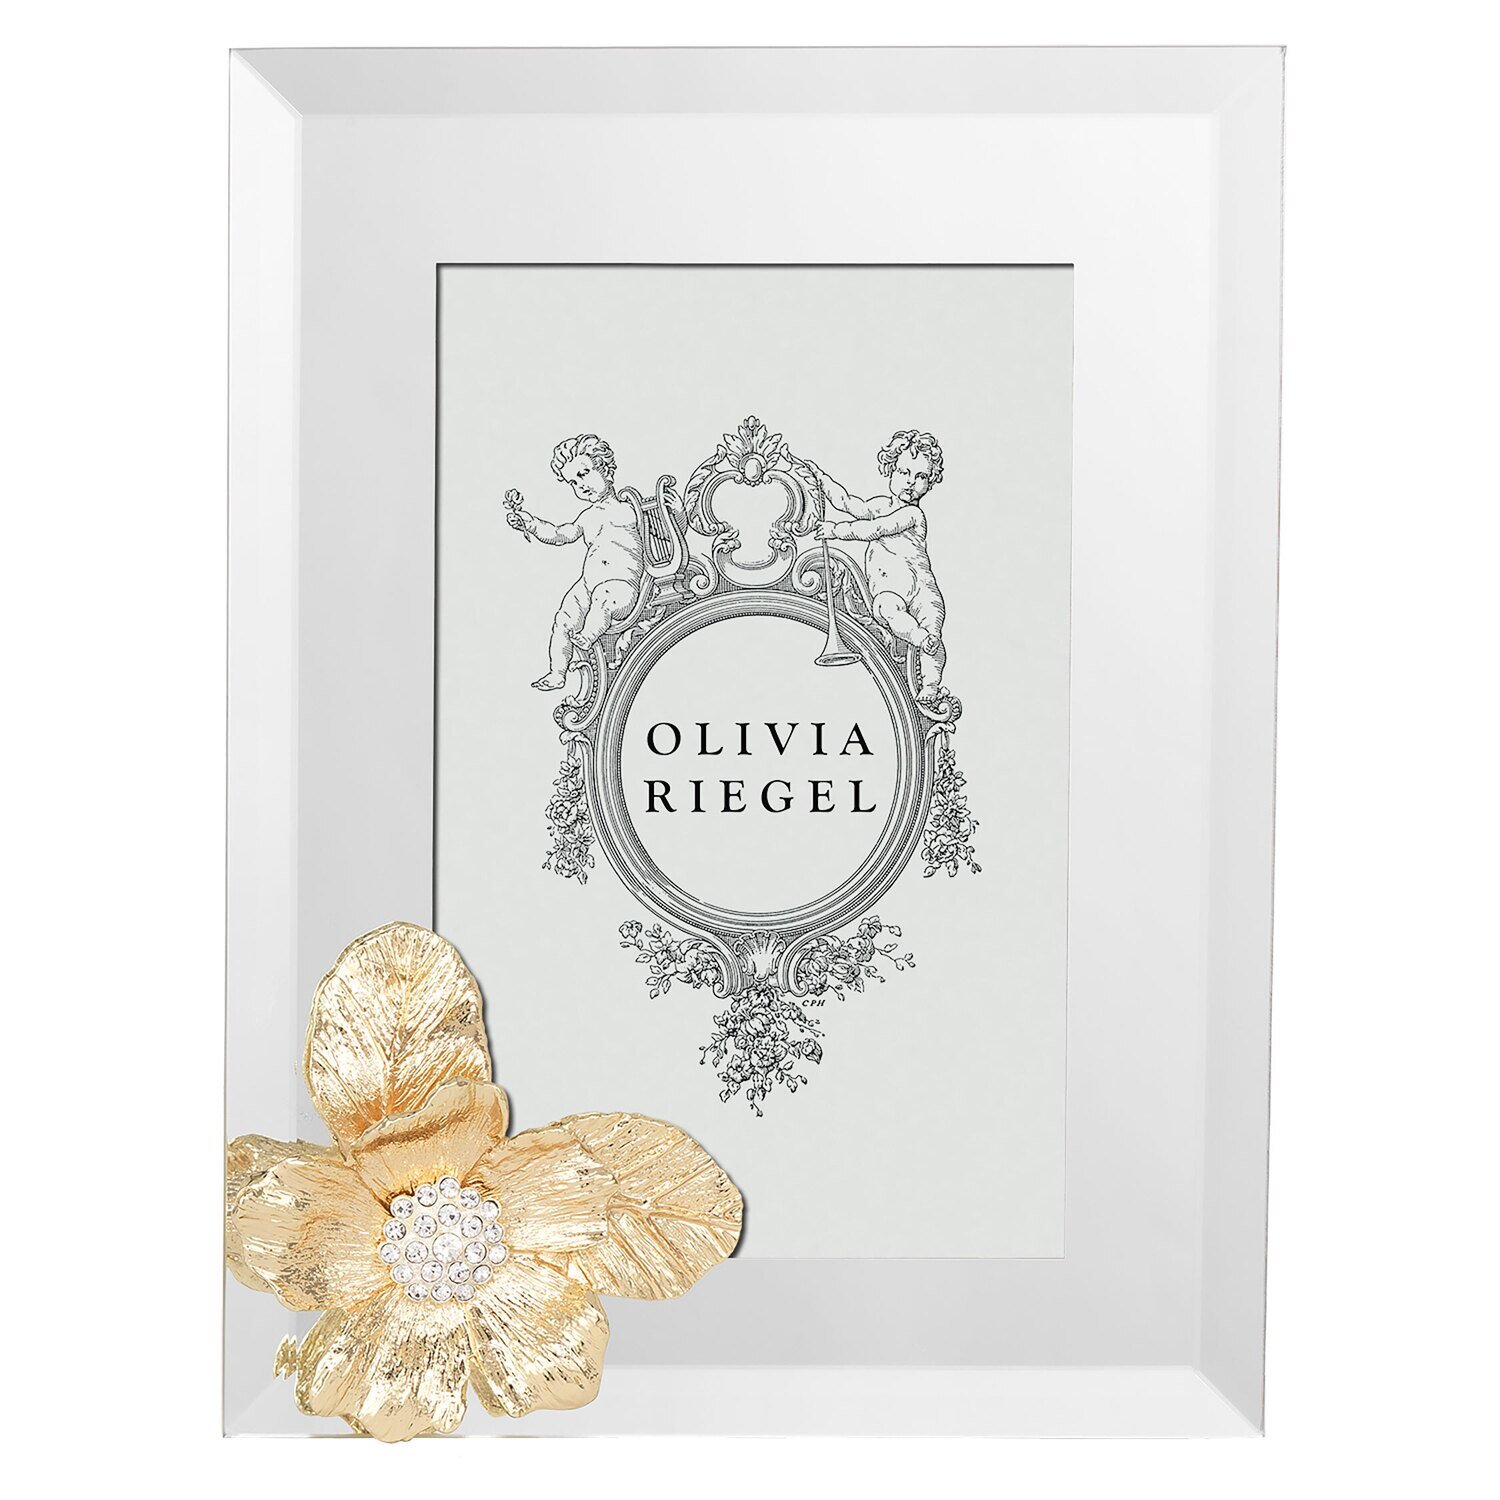 Olivia Riegel Gold Botanica 4 x 6 Inch Picture Frame RT0214